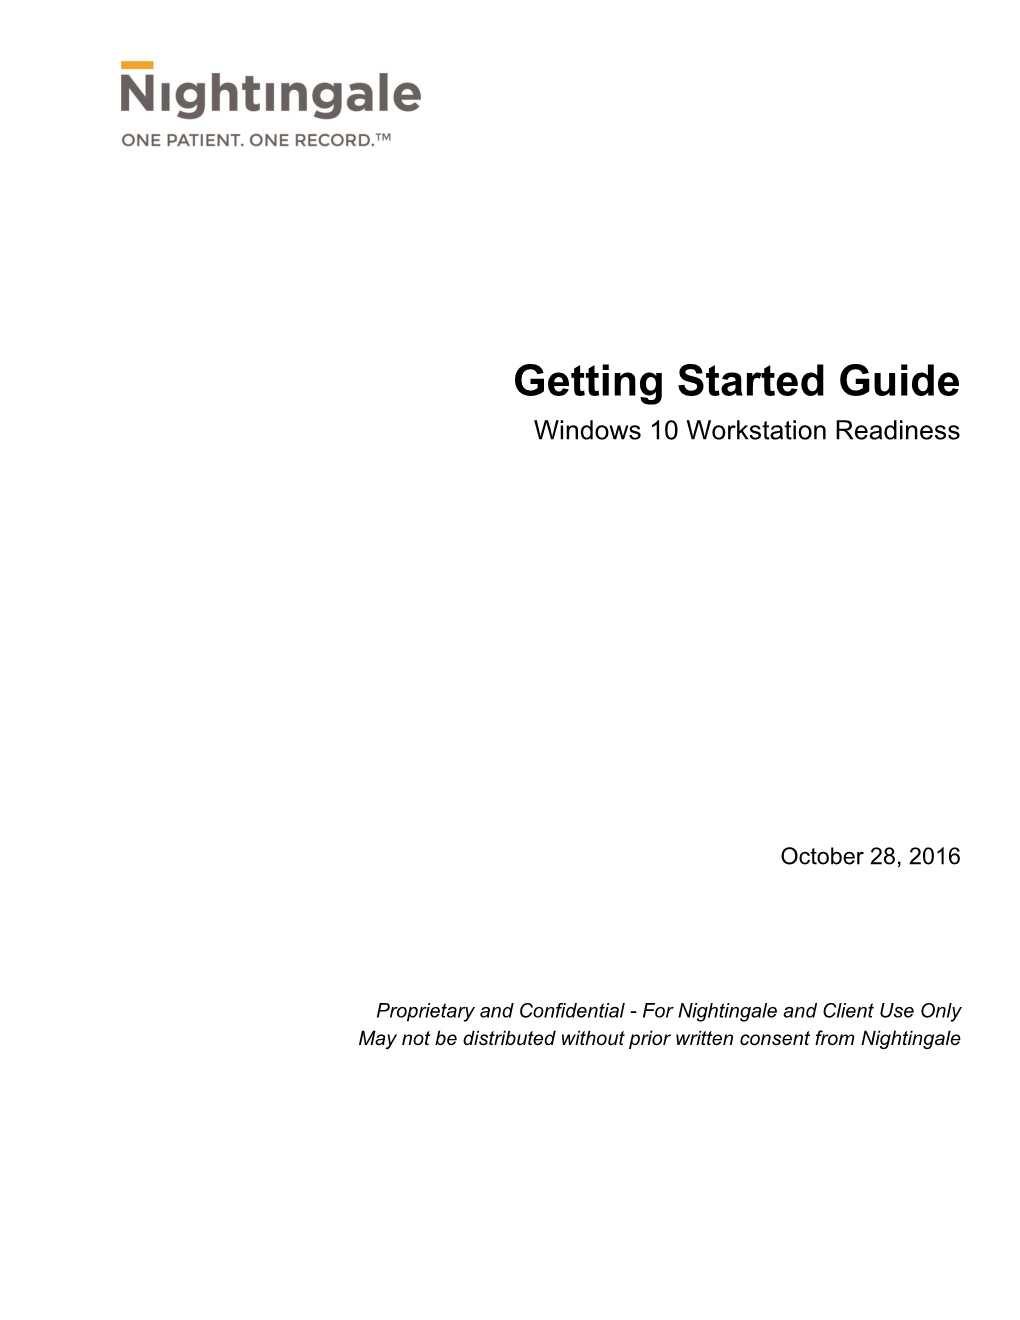 Getting Started Guide Windows 10 Workstation Readiness